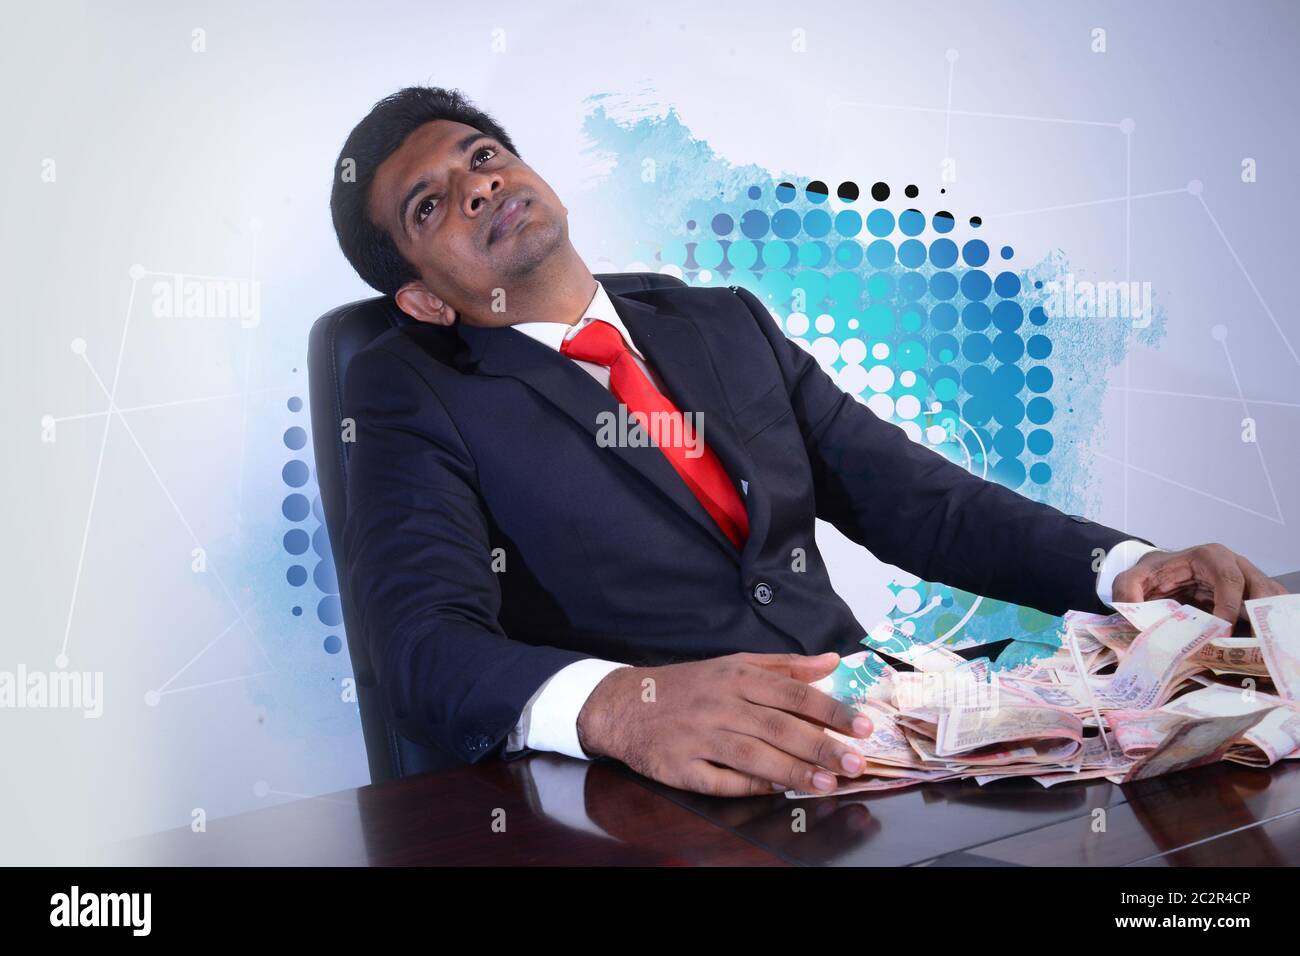 man with currency notes Stock Photo